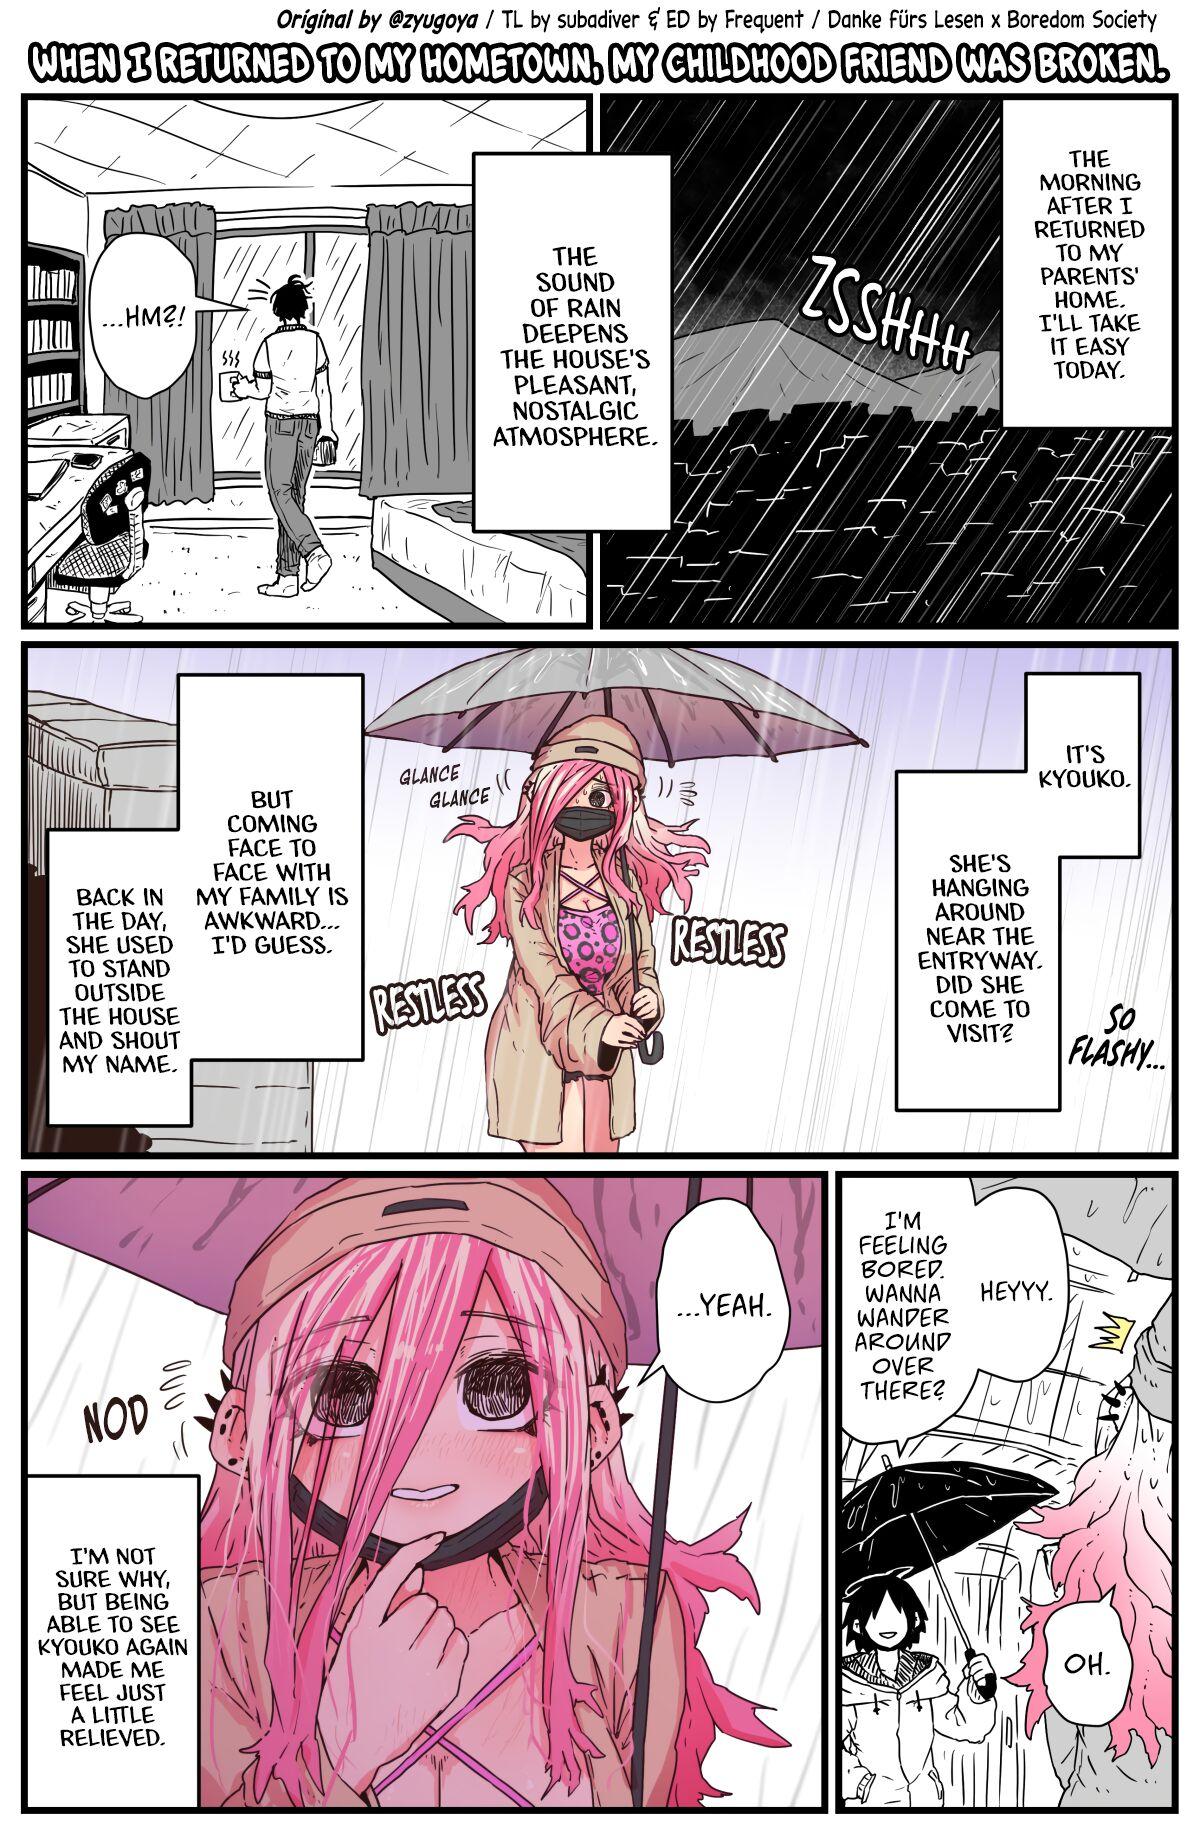 Buttfucking When I Returned to My Hometown, My Childhood Friend was Broken - Original First - Page 7